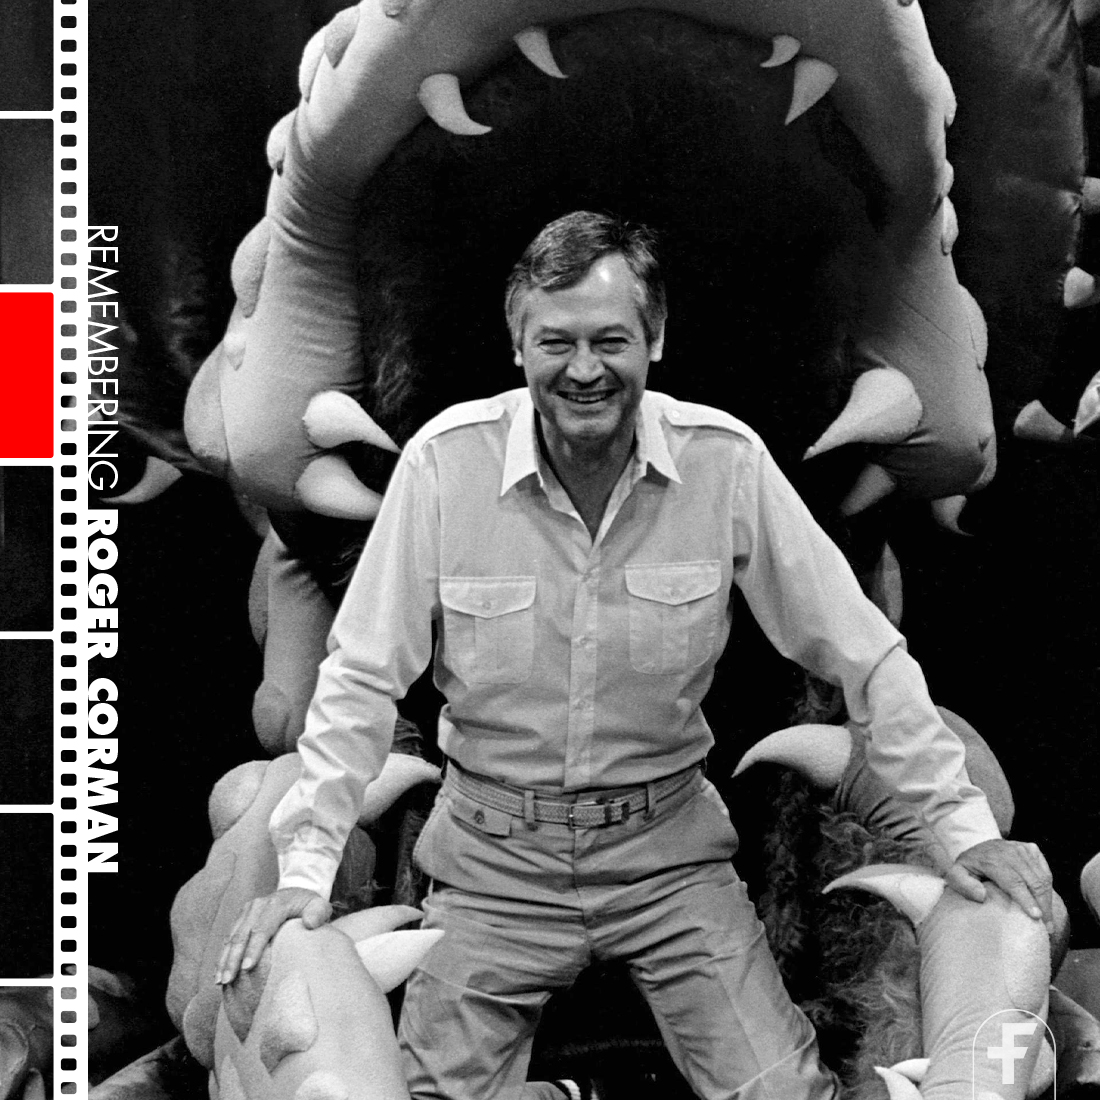 Farewell to the great Roger Corman, whose body of work is beyond massive, and whose influence on the genre is literally immeasurable. 

Our condolences to his friends, family and many fans. Thanks for everything, sir.